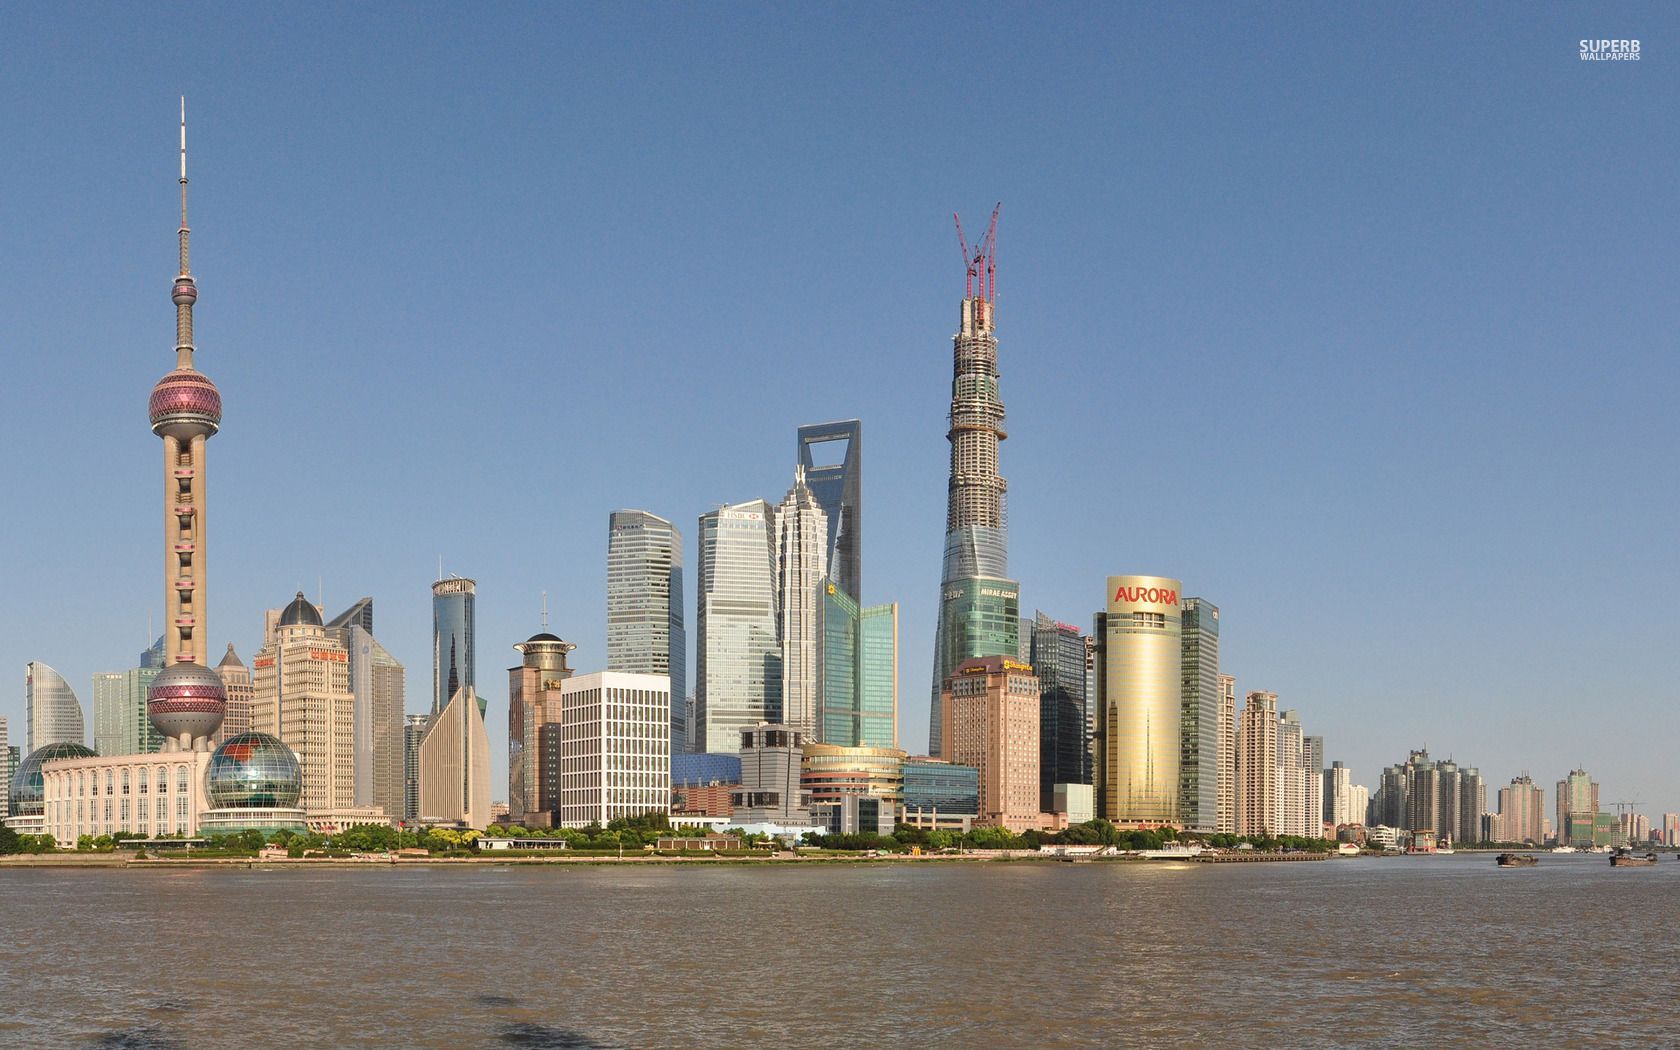 Shanghai Tower wallpaper. Shanghai tower, Tower, Places around the world